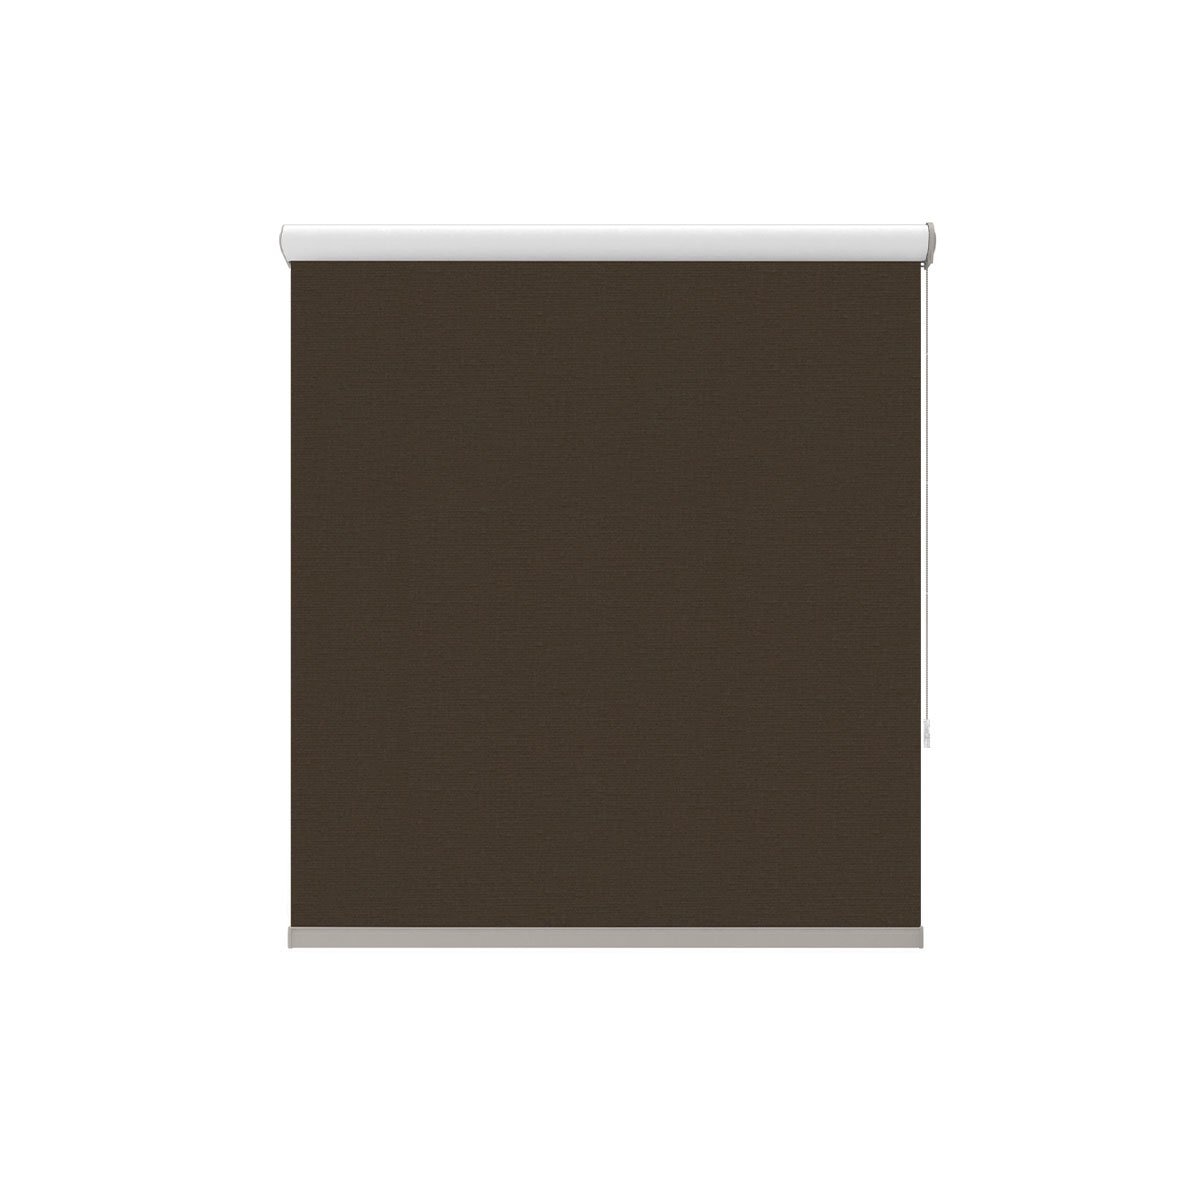 Persiana Enrollable Black Out Night Fall 0.80 X 1.80 Cocoa Classic